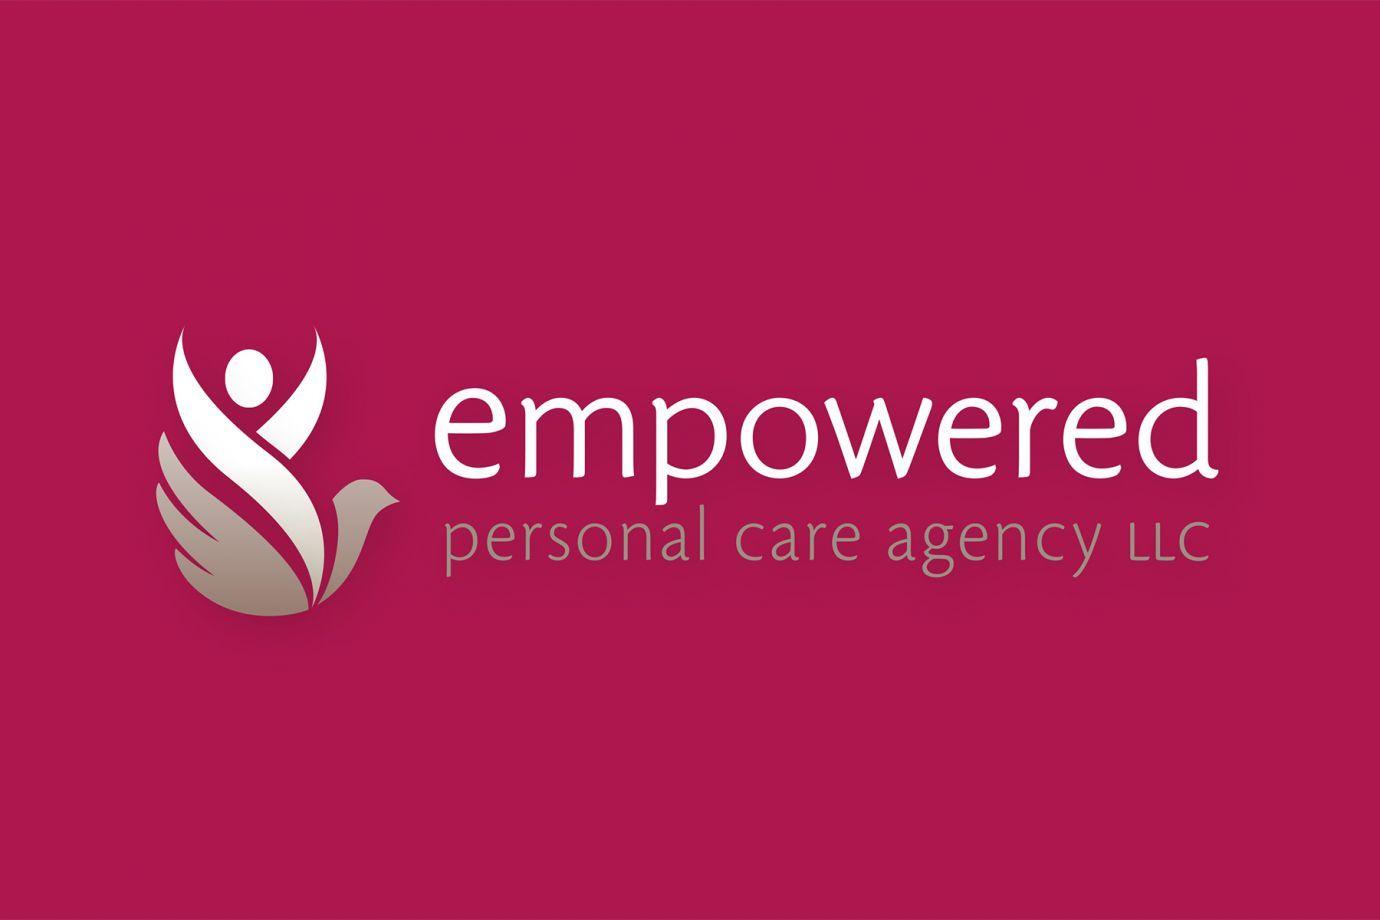 Personal Care Logo - Empowered Personal Care Agency Design In Elkhart Goshen, Indiana